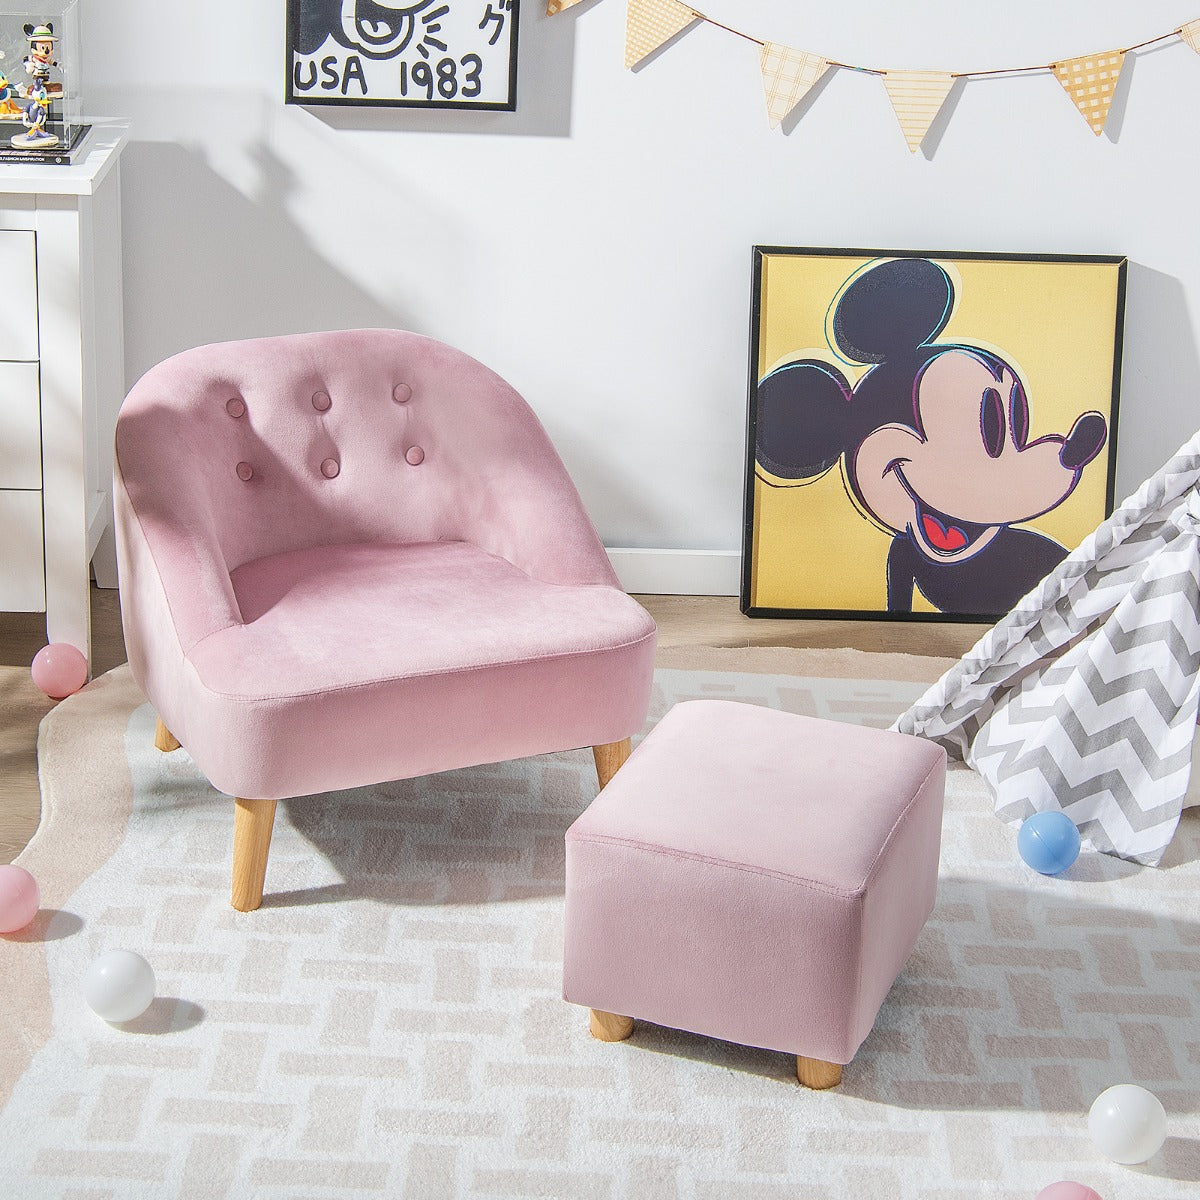 2 Pieces Upholstered Kids Sofa Set with Ottoman-Pink